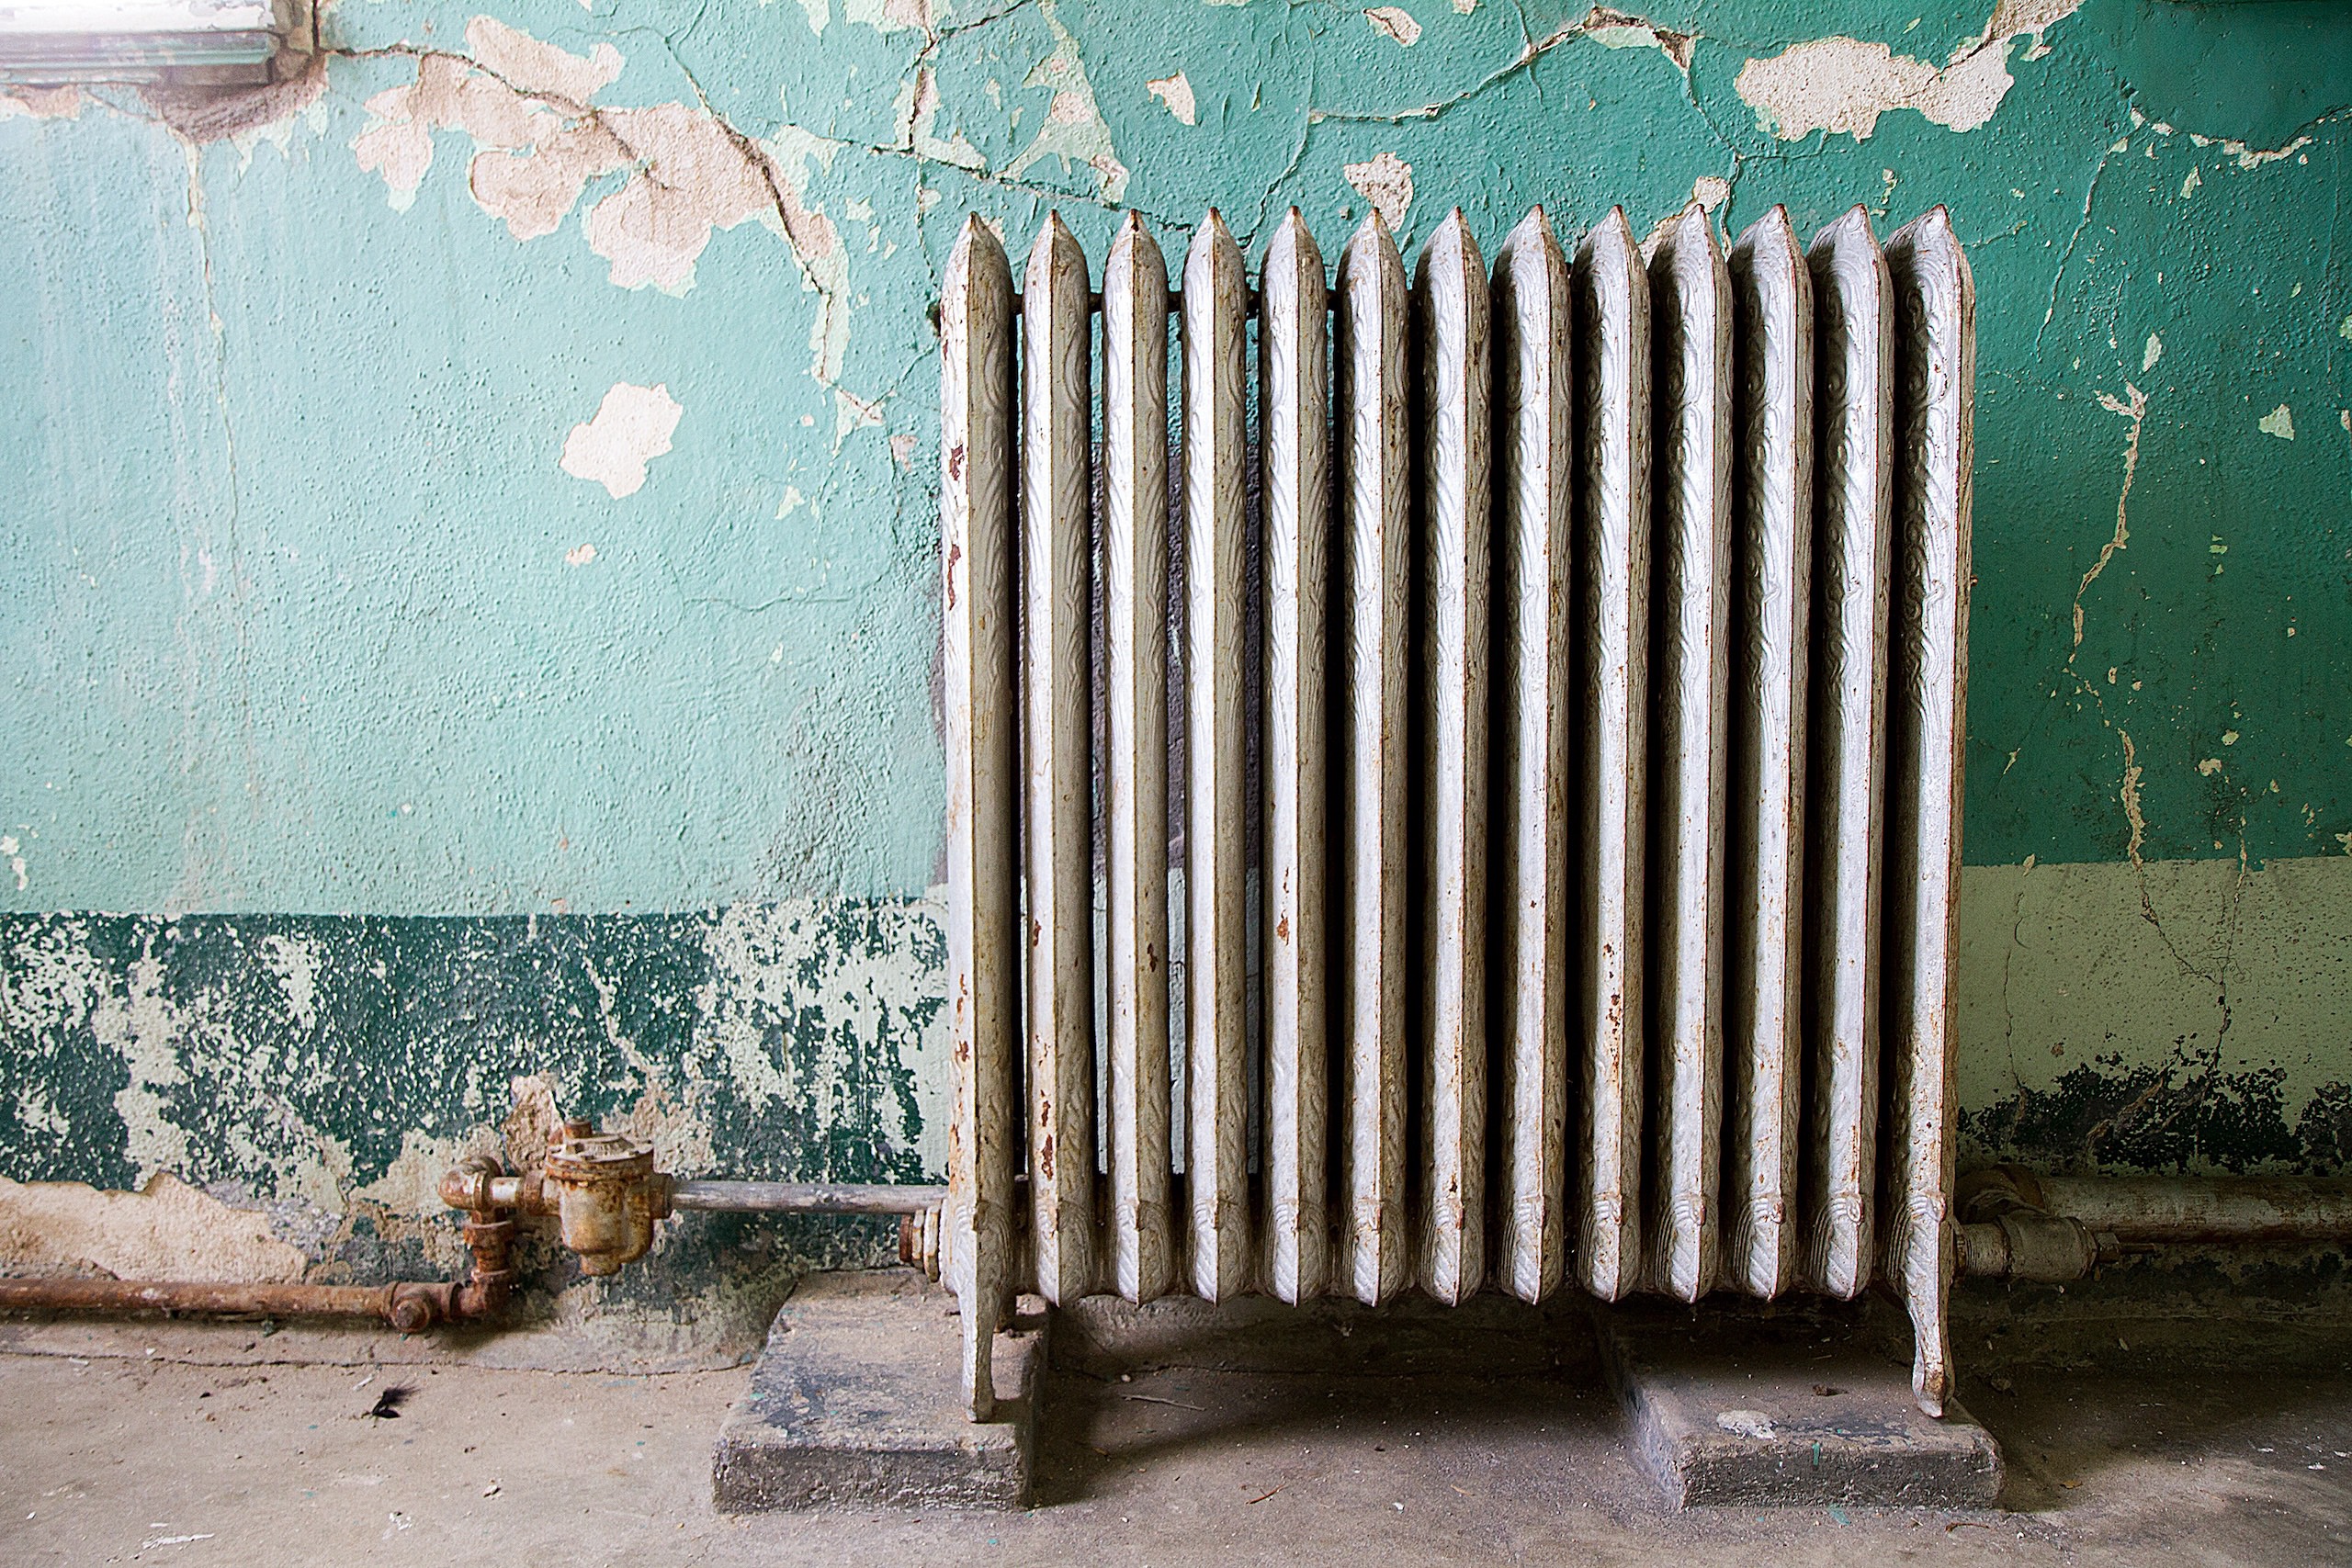 Rusty radiator in front of a cracked wall with peeling aqua-green paint.